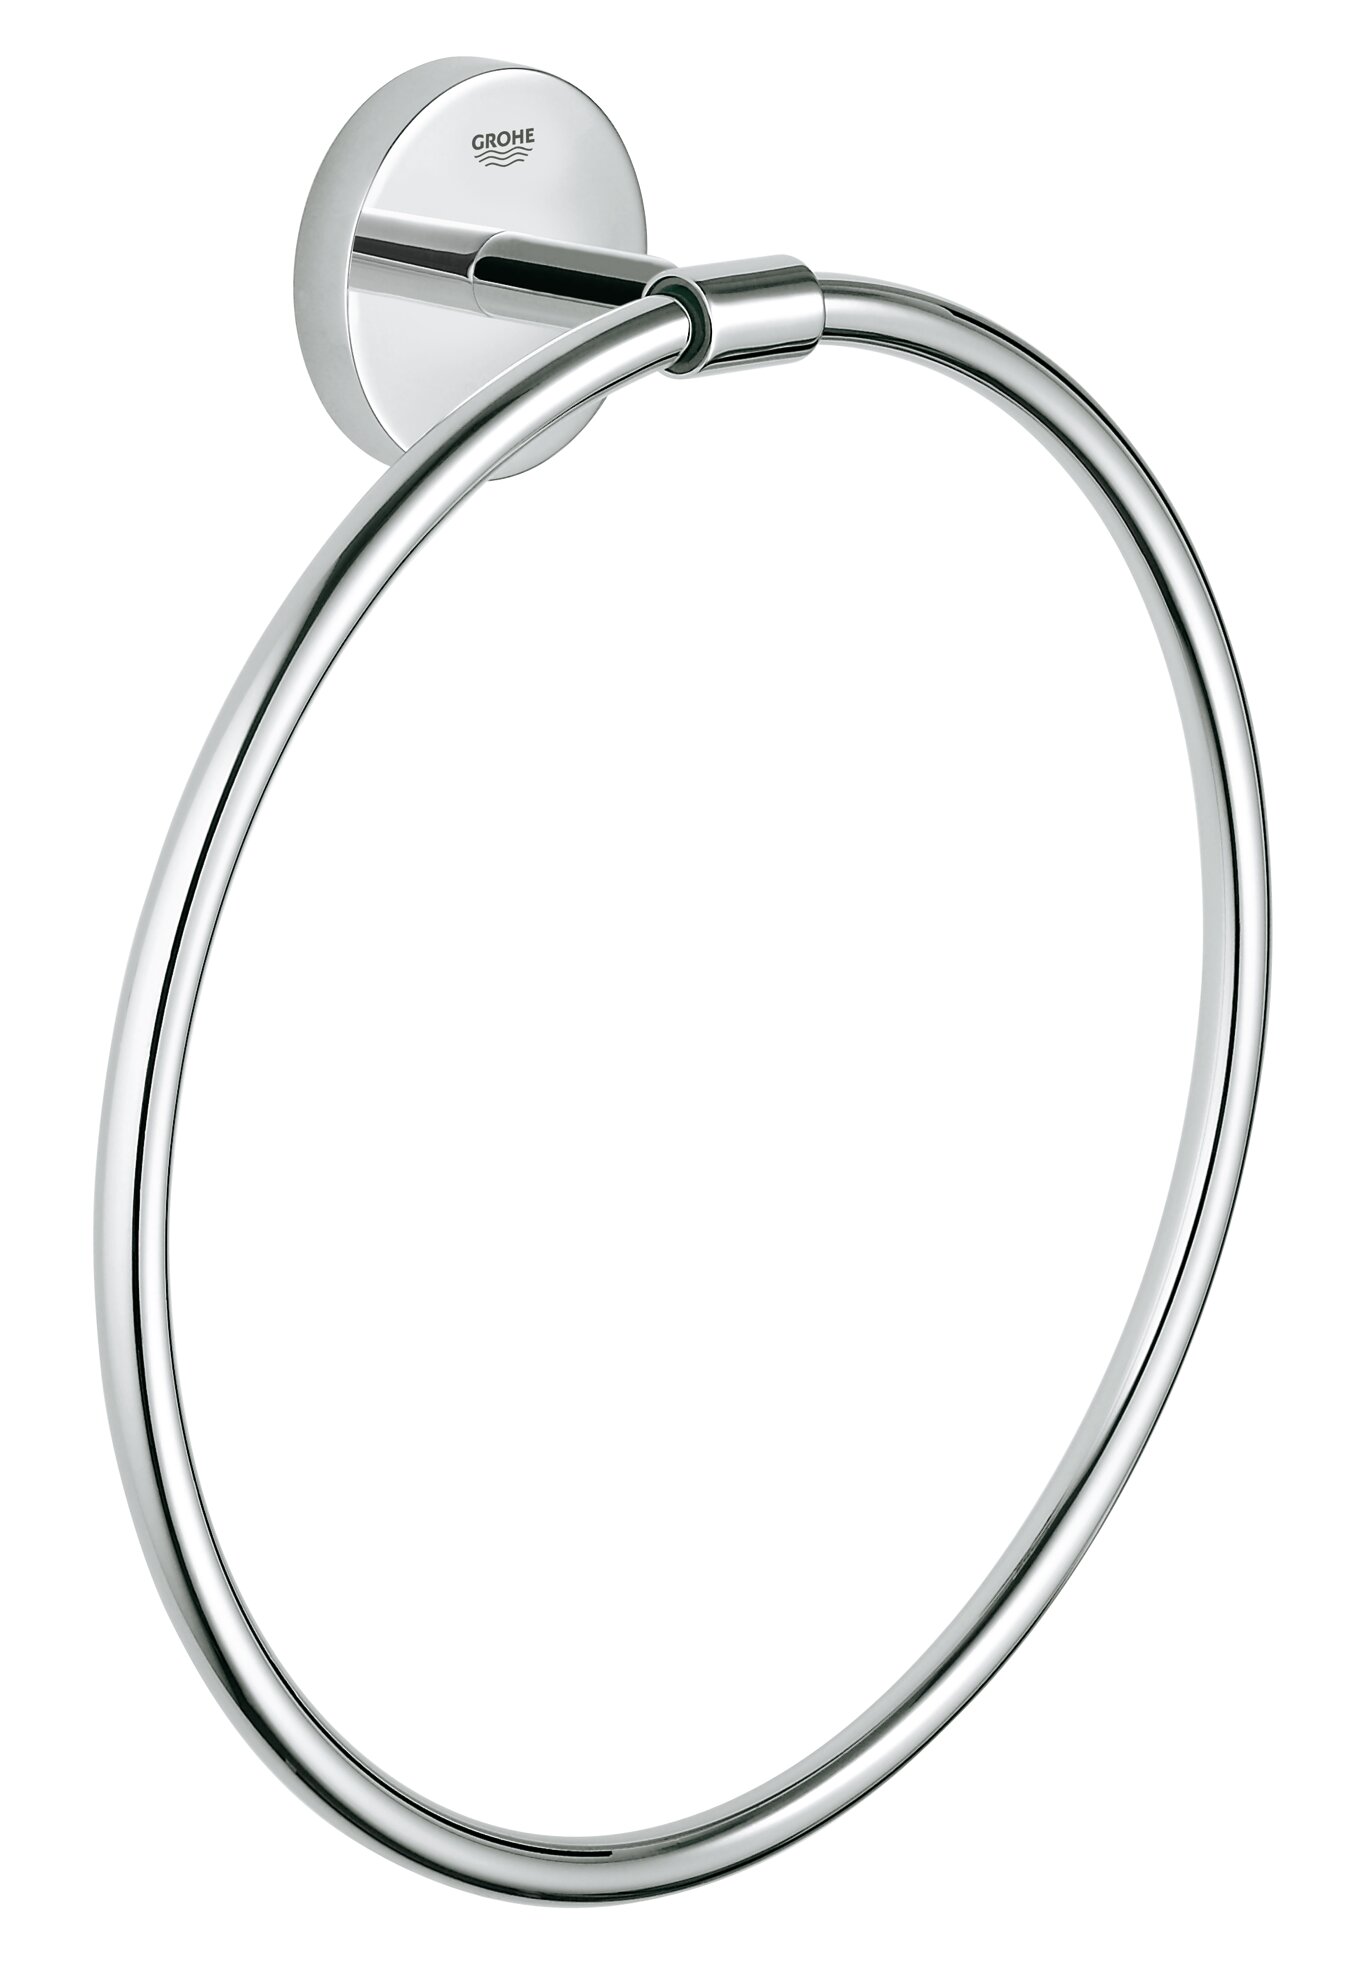 Continental Square Hand Towel Ring | Toilet Accessories